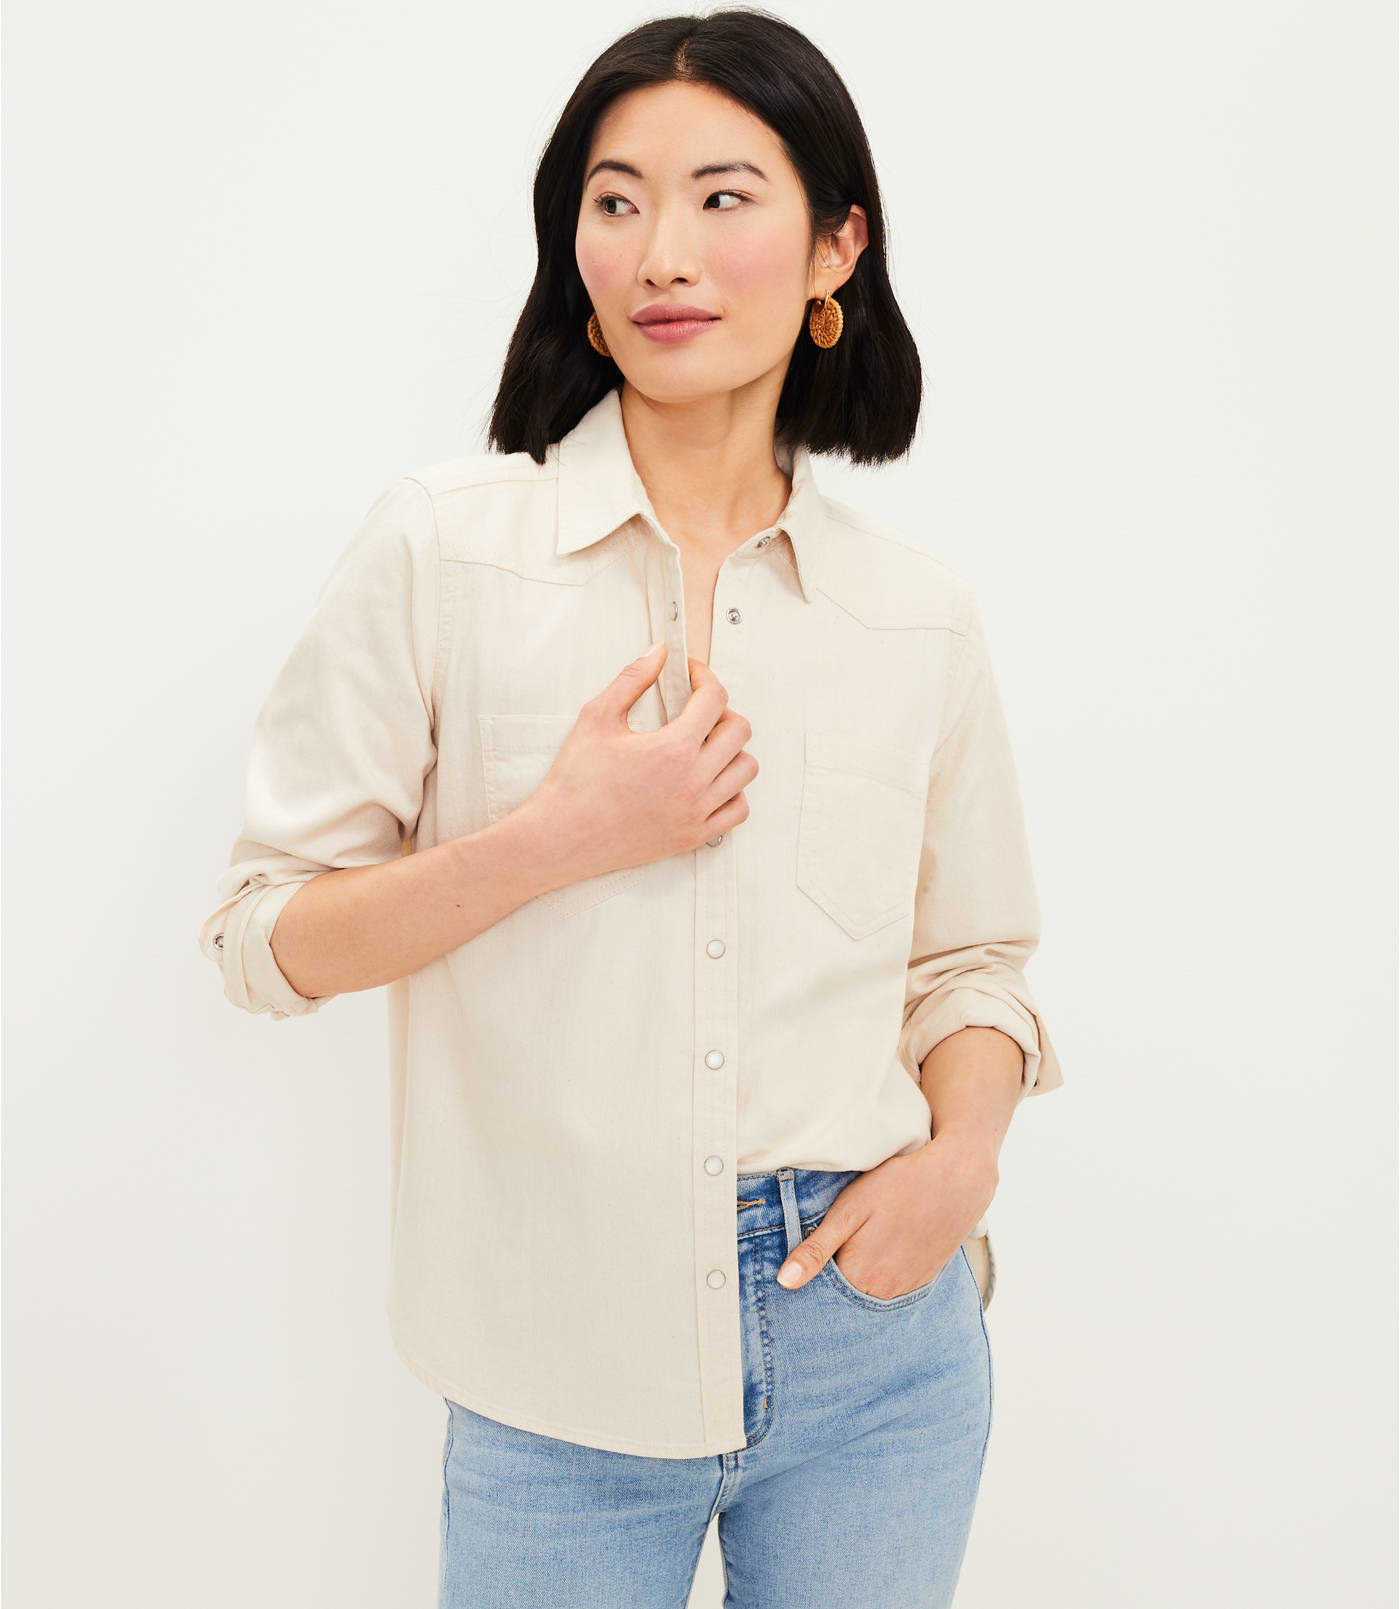 A model in the cream blouse